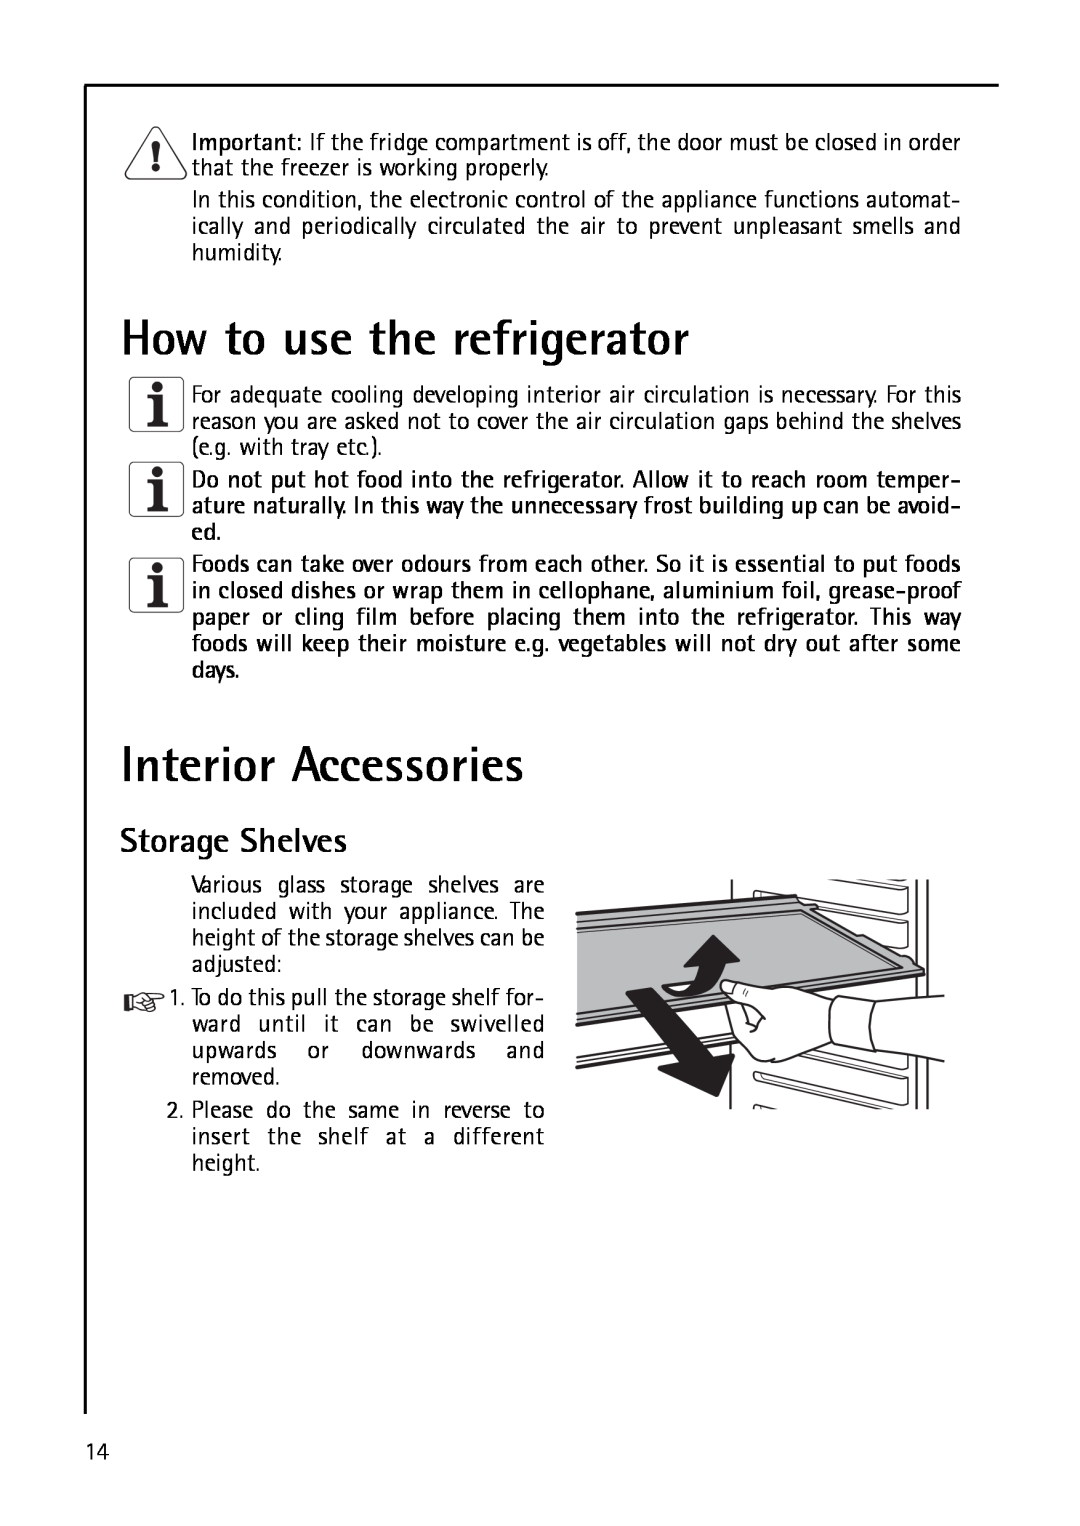 AEG 200372733, S 75400 KG8 manual How to use the refrigerator, Interior Accessories, Storage Shelves 